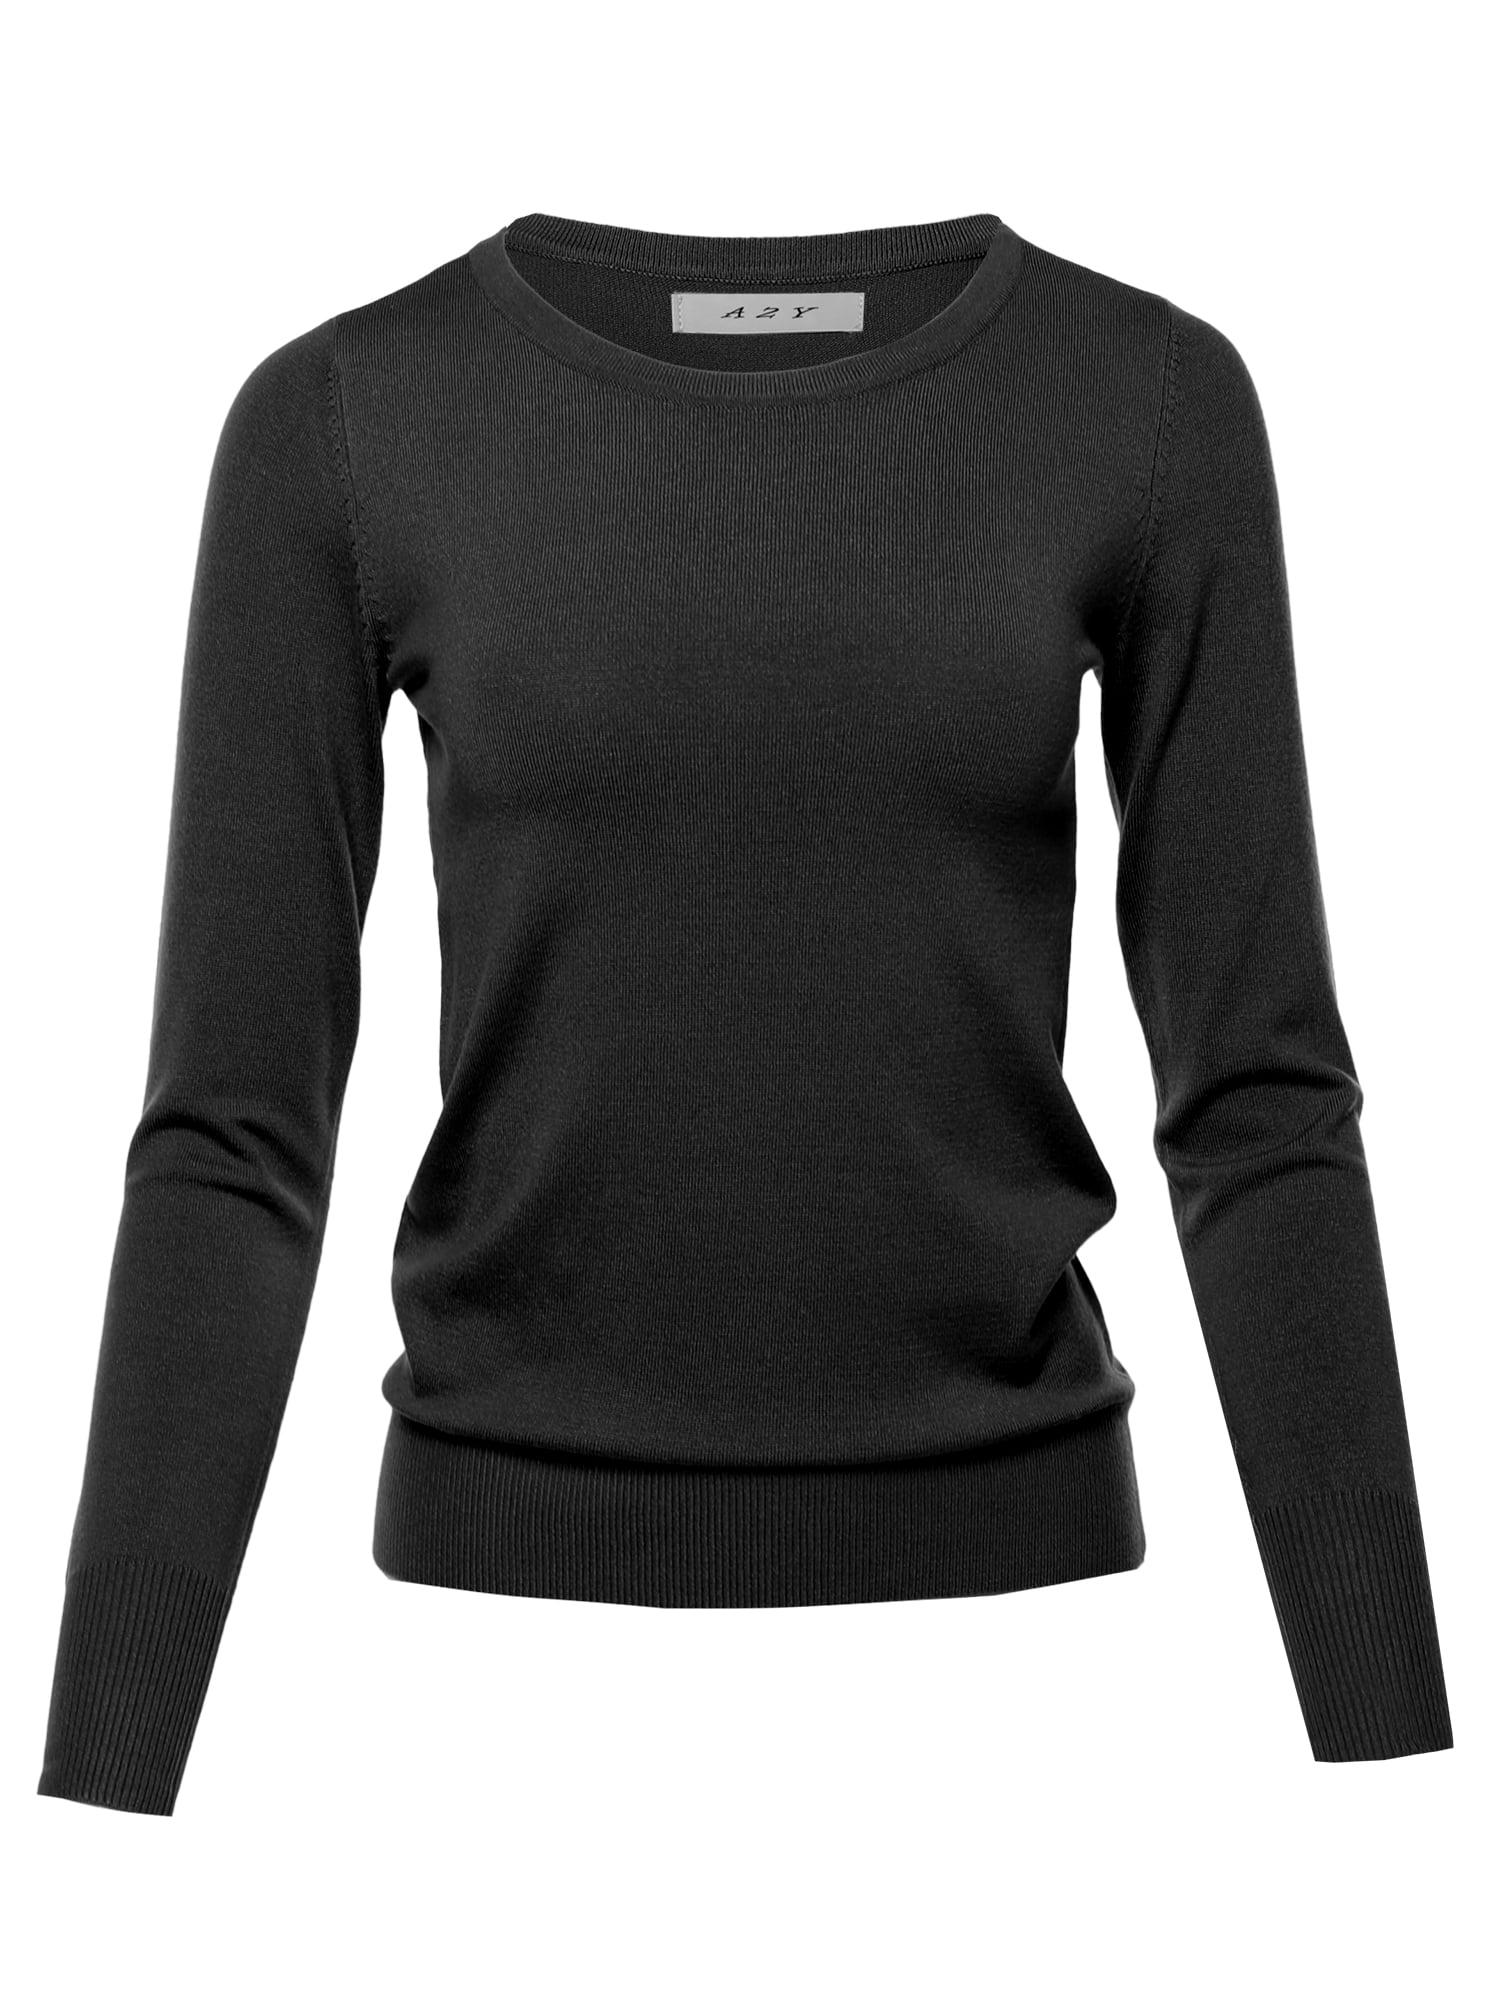 A2Y Women's Fitted Crew Neck Long Sleeve Pullover Classic Sweater Black